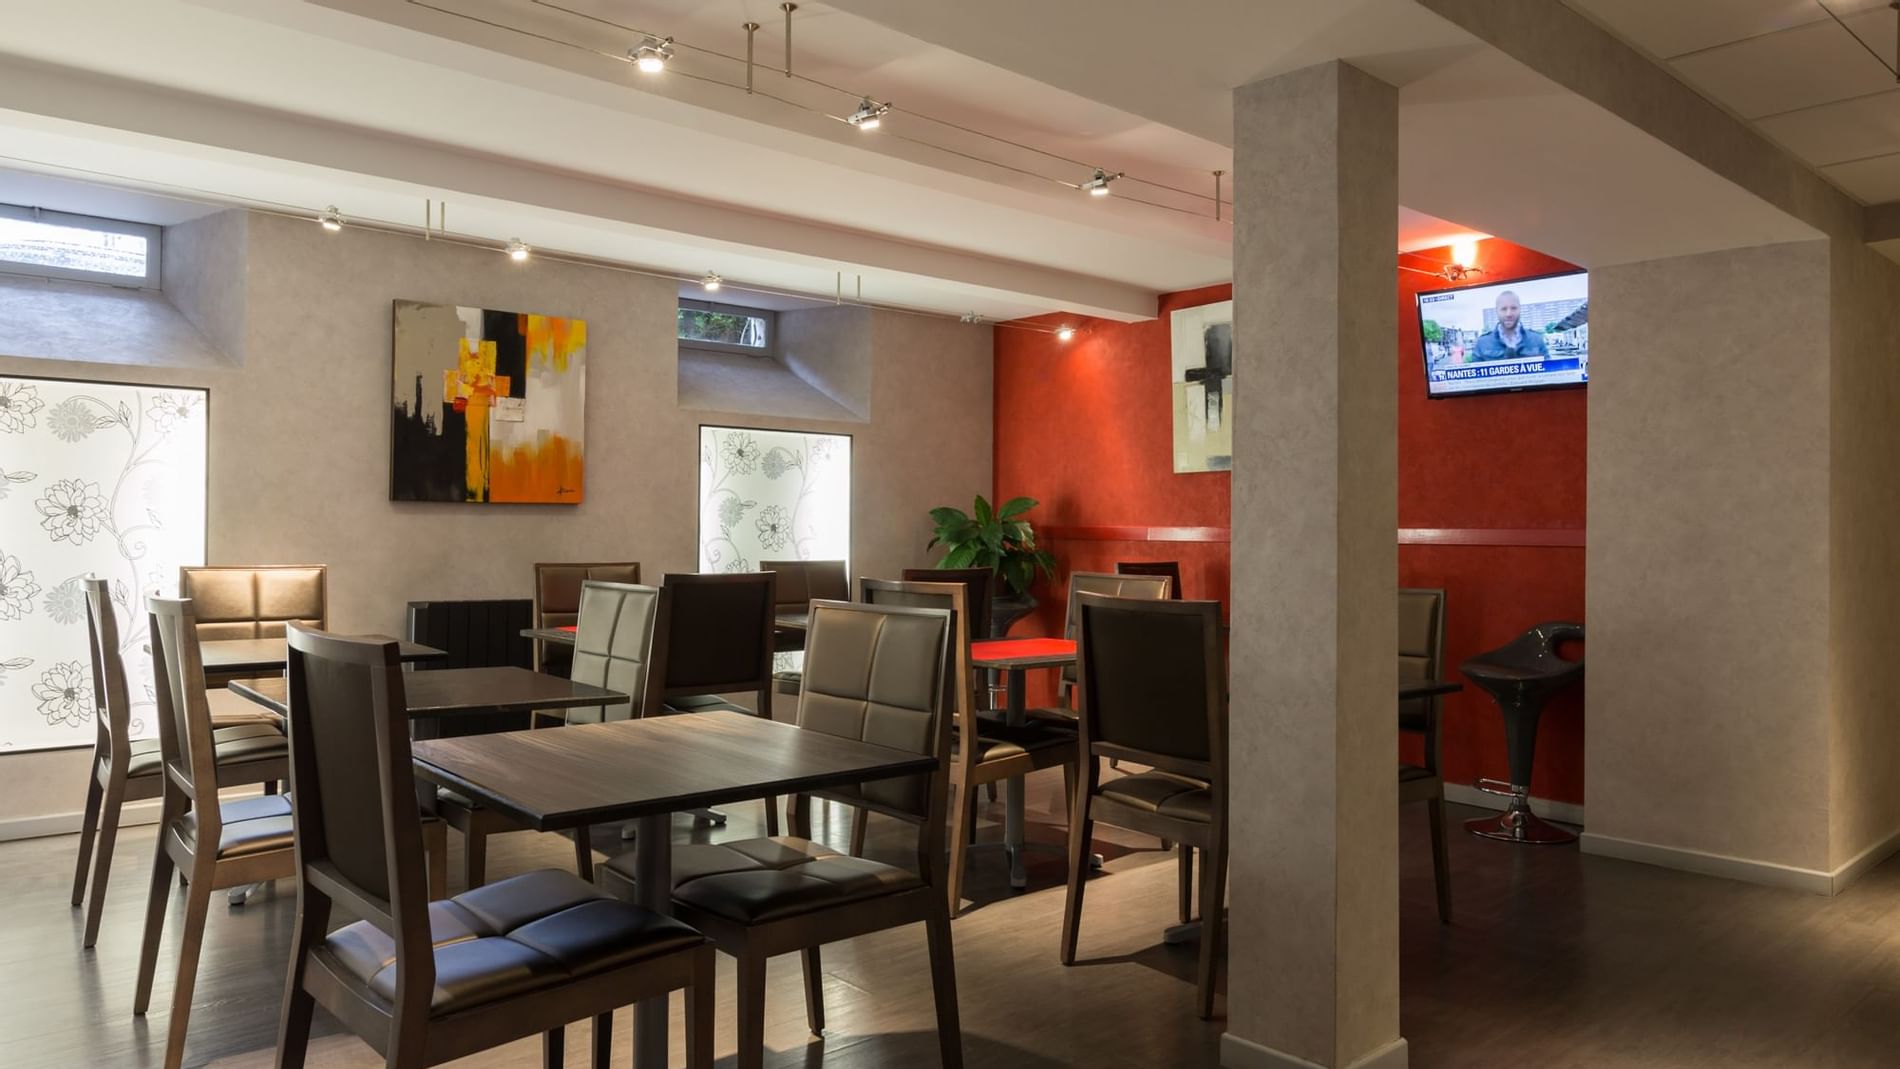 Dining area with TV in a restaurant at Originals Hotels